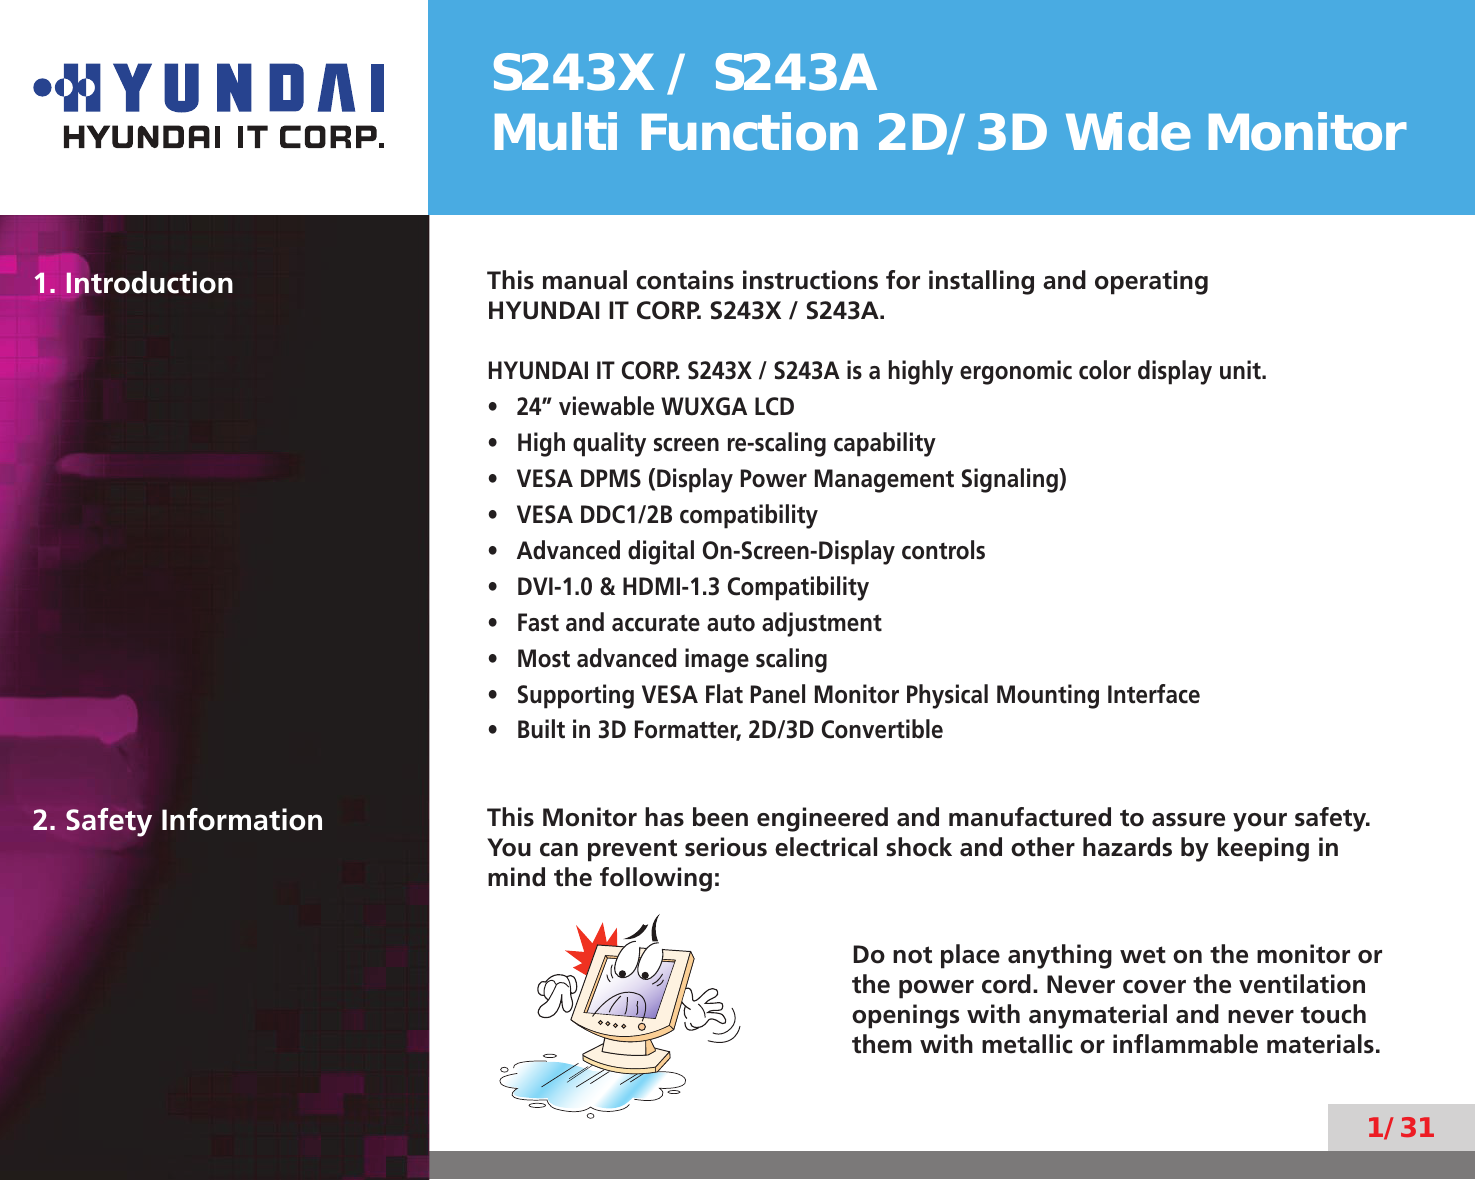 S243X / S243AMulti Function 2D/3D Wide Monitor1/311. Introduction This manual contains instructions for installing and operatingHYUNDAI IT CORP. S243X / S243A.HYUNDAI IT CORP. S243X / S243A is a highly ergonomic color display unit.24” viewable WUXGA LCD• High quality screen re-scaling capability• VESA DPMS (Display Power Management Signaling)• VESA DDC1/2B compatibility• Advanced digital On-Screen-Display controls• DVI-1.0 &amp; HDMI-1.3 Compatibility• Fast and accurate auto adjustment• Most advanced image scaling• Supporting VESA Flat Panel Monitor Physical Mounting Interface• Built in 3D Formatter, 2D/3D Convertible• 2. Safety Information This Monitor has been engineered and manufactured to assure your safety. You can prevent serious electrical shock and other hazards by keeping in mind the following:Do not place anything wet on the monitor or the power cord. Never cover the ventilation openings with anymaterial and never touch them with metallic or inﬂammable materials.